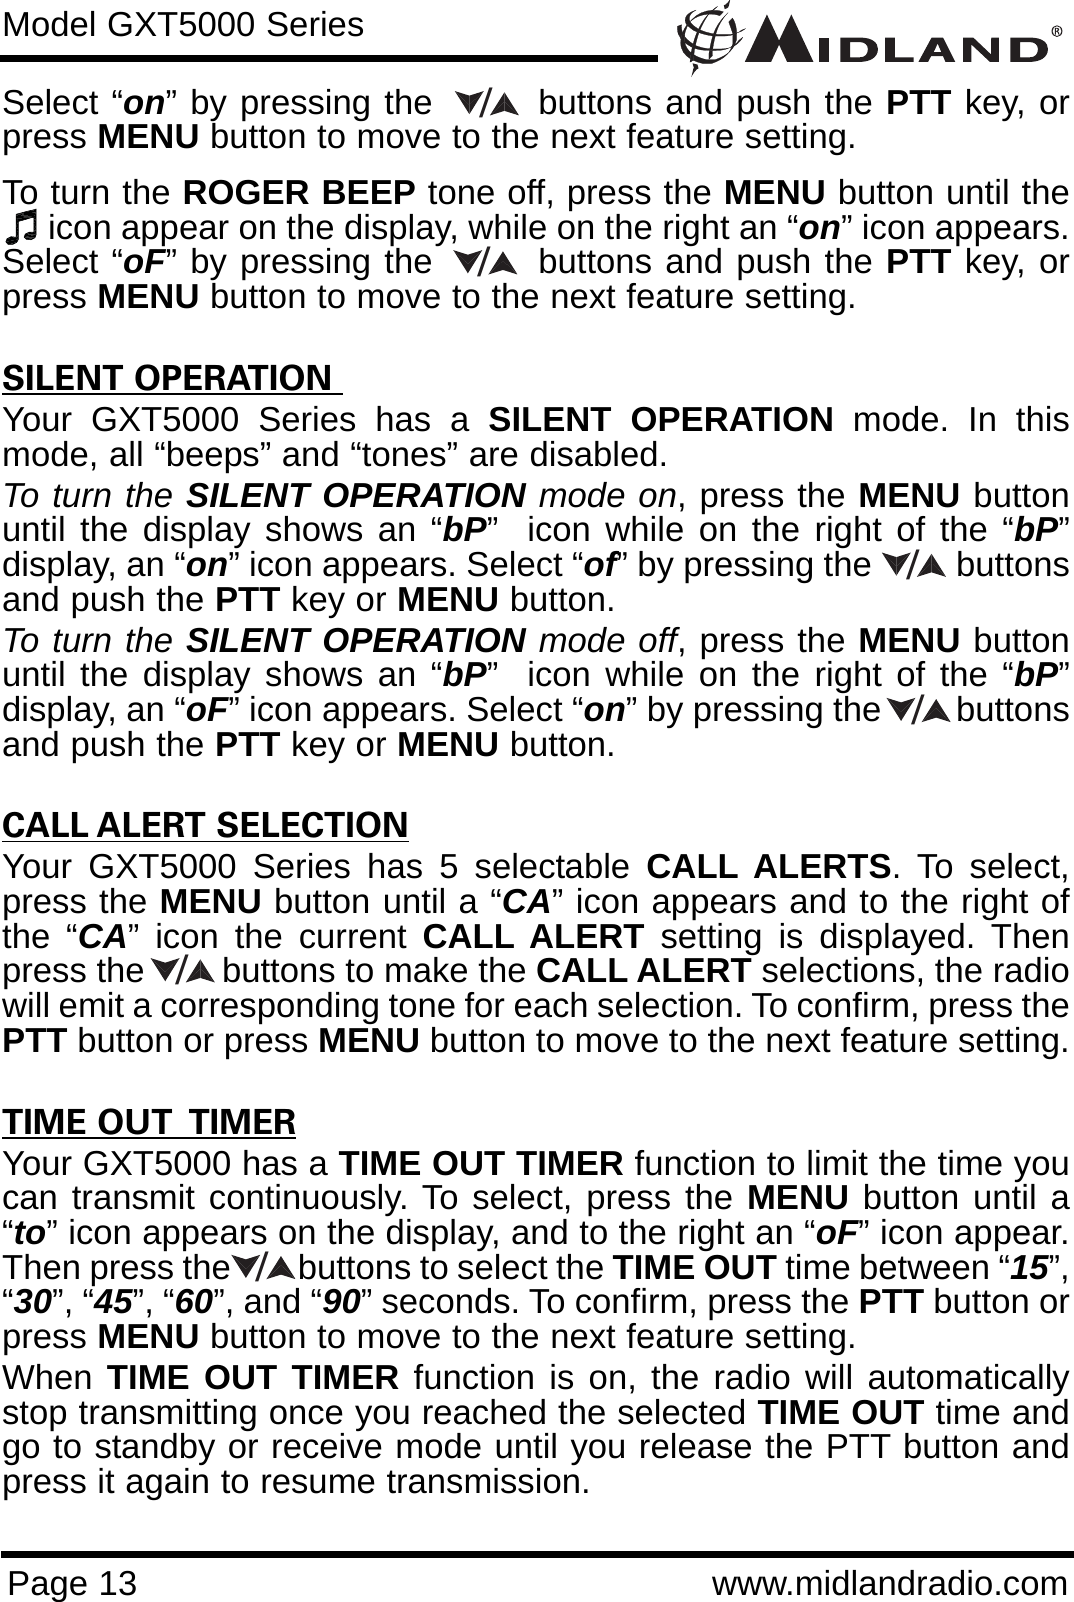 Page 13 www.midlandradio.comModel GXT5000 SeriesSelect “on” by pressing the        buttons and push the PTT key, orpress MENU button to move to the next feature setting. To turn the ROGER BEEP tone off, press the MENU button until theicon appear on the display, while on the right an “on” icon appears.Select “oF” by pressing the        buttons and push the PTT key, orpress MENU button to move to the next feature setting. SILENT OPERATION Your GXT5000 Series has a SILENT OPERATION mode. In thismode, all “beeps” and “tones” are disabled. To turn the SILENT OPERATION mode on, press the MENU buttonuntil the display shows an “bP”  icon while on the right of the “bP”display, an “on” icon appears. Select “of” by pressing the         buttonsand push the PTT key or MENU button. To turn the SILENT OPERATION mode off, press the MENU buttonuntil the display shows an “bP”  icon while on the right of the “bP”display, an “oF” icon appears. Select “on” by pressing the        buttonsand push the PTT key or MENU button.CALL ALERT SELECTIONYour GXT5000 Series has 5 selectable CALL ALERTS. To select,press the MENU button until a “CA” icon appears and to the right ofthe “CA” icon the current CALL ALERT setting is displayed. Thenpress the        buttons to make the CALL ALERT selections, the radiowill emit a corresponding tone for each selection. To confirm, press thePTT button or press MENU button to move to the next feature setting.TIME OUT  TIMERYour GXT5000 has a TIME OUT TIMER function to limit the time youcan transmit continuously. To select, press the MENU button until a“to” icon appears on the display, and to the right an “oF” icon appear.Then press the        buttons to select the TIME OUT time between “15”,“30”, “45”, “60”, and “90” seconds. To confirm, press the PTT button orpress MENU button to move to the next feature setting.When TIME OUT TIMER function is on, the radio will automaticallystop transmitting once you reached the selected TIME OUT time andgo to standby or receive mode until you release the PTT button andpress it again to resume transmission.//////